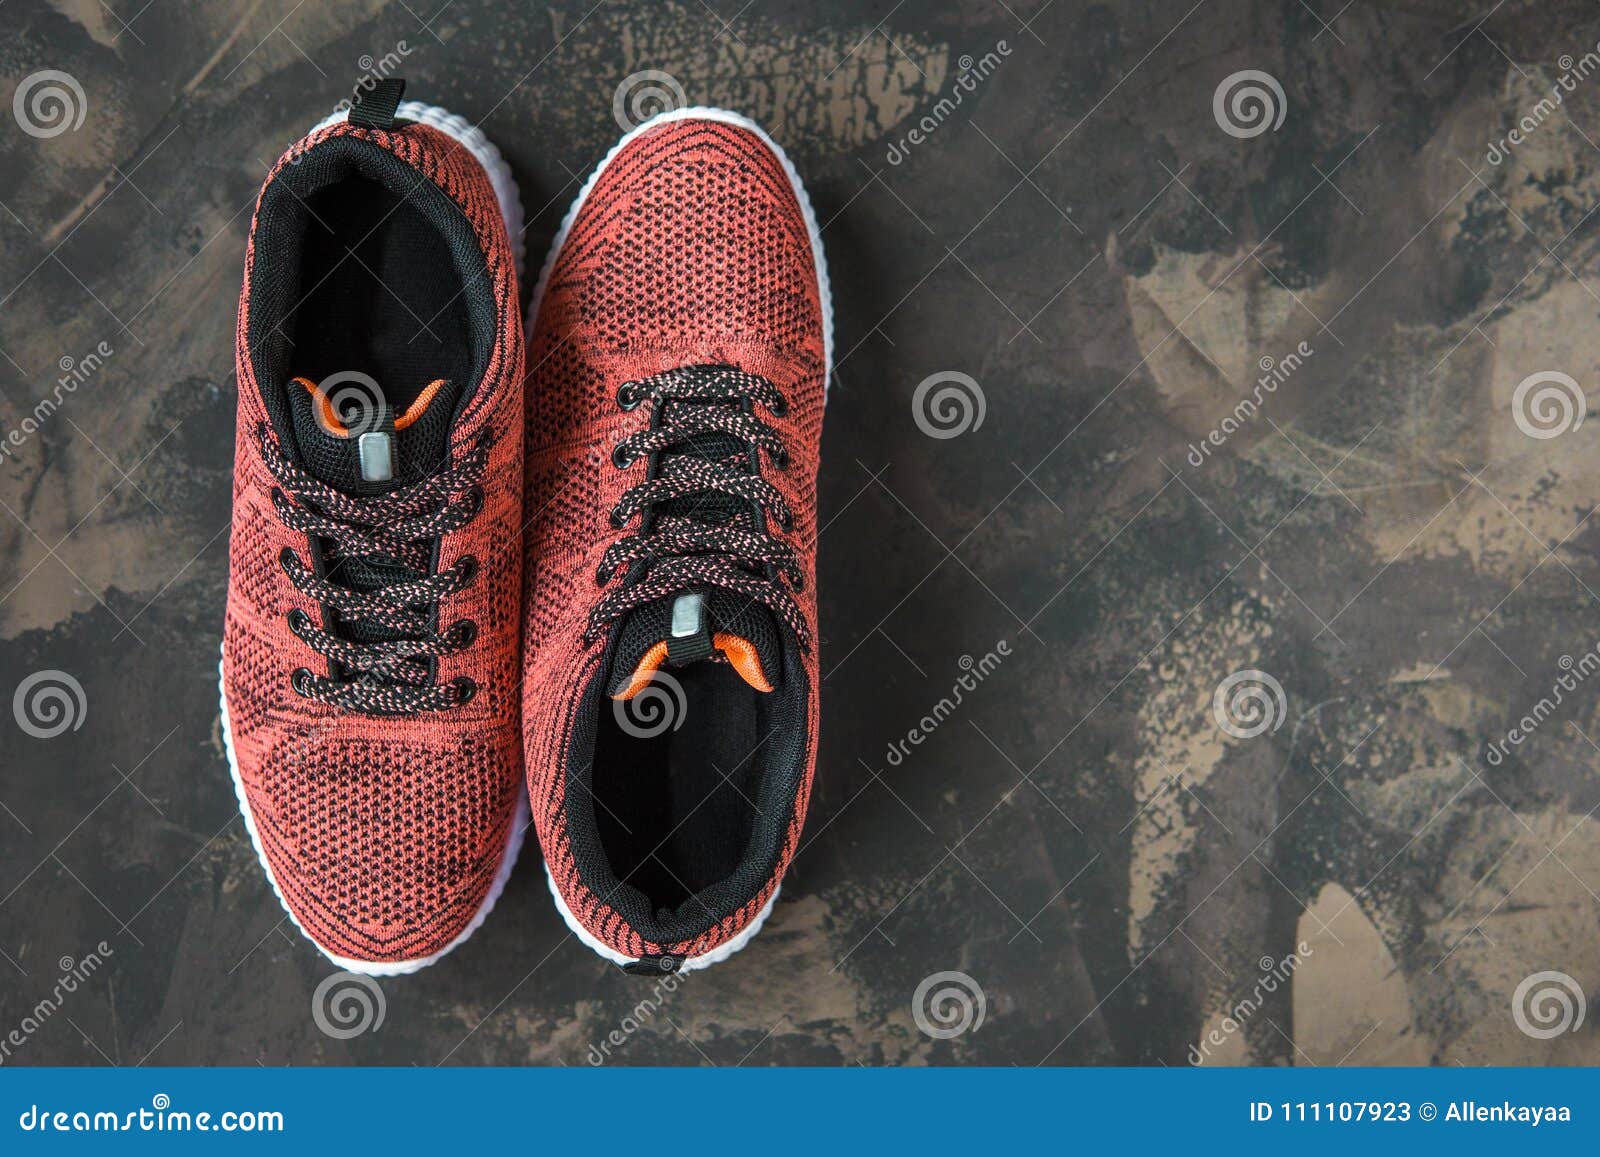 Sneakers for Woman. Footwear for Fitness and Sport Stock Image - Image ...